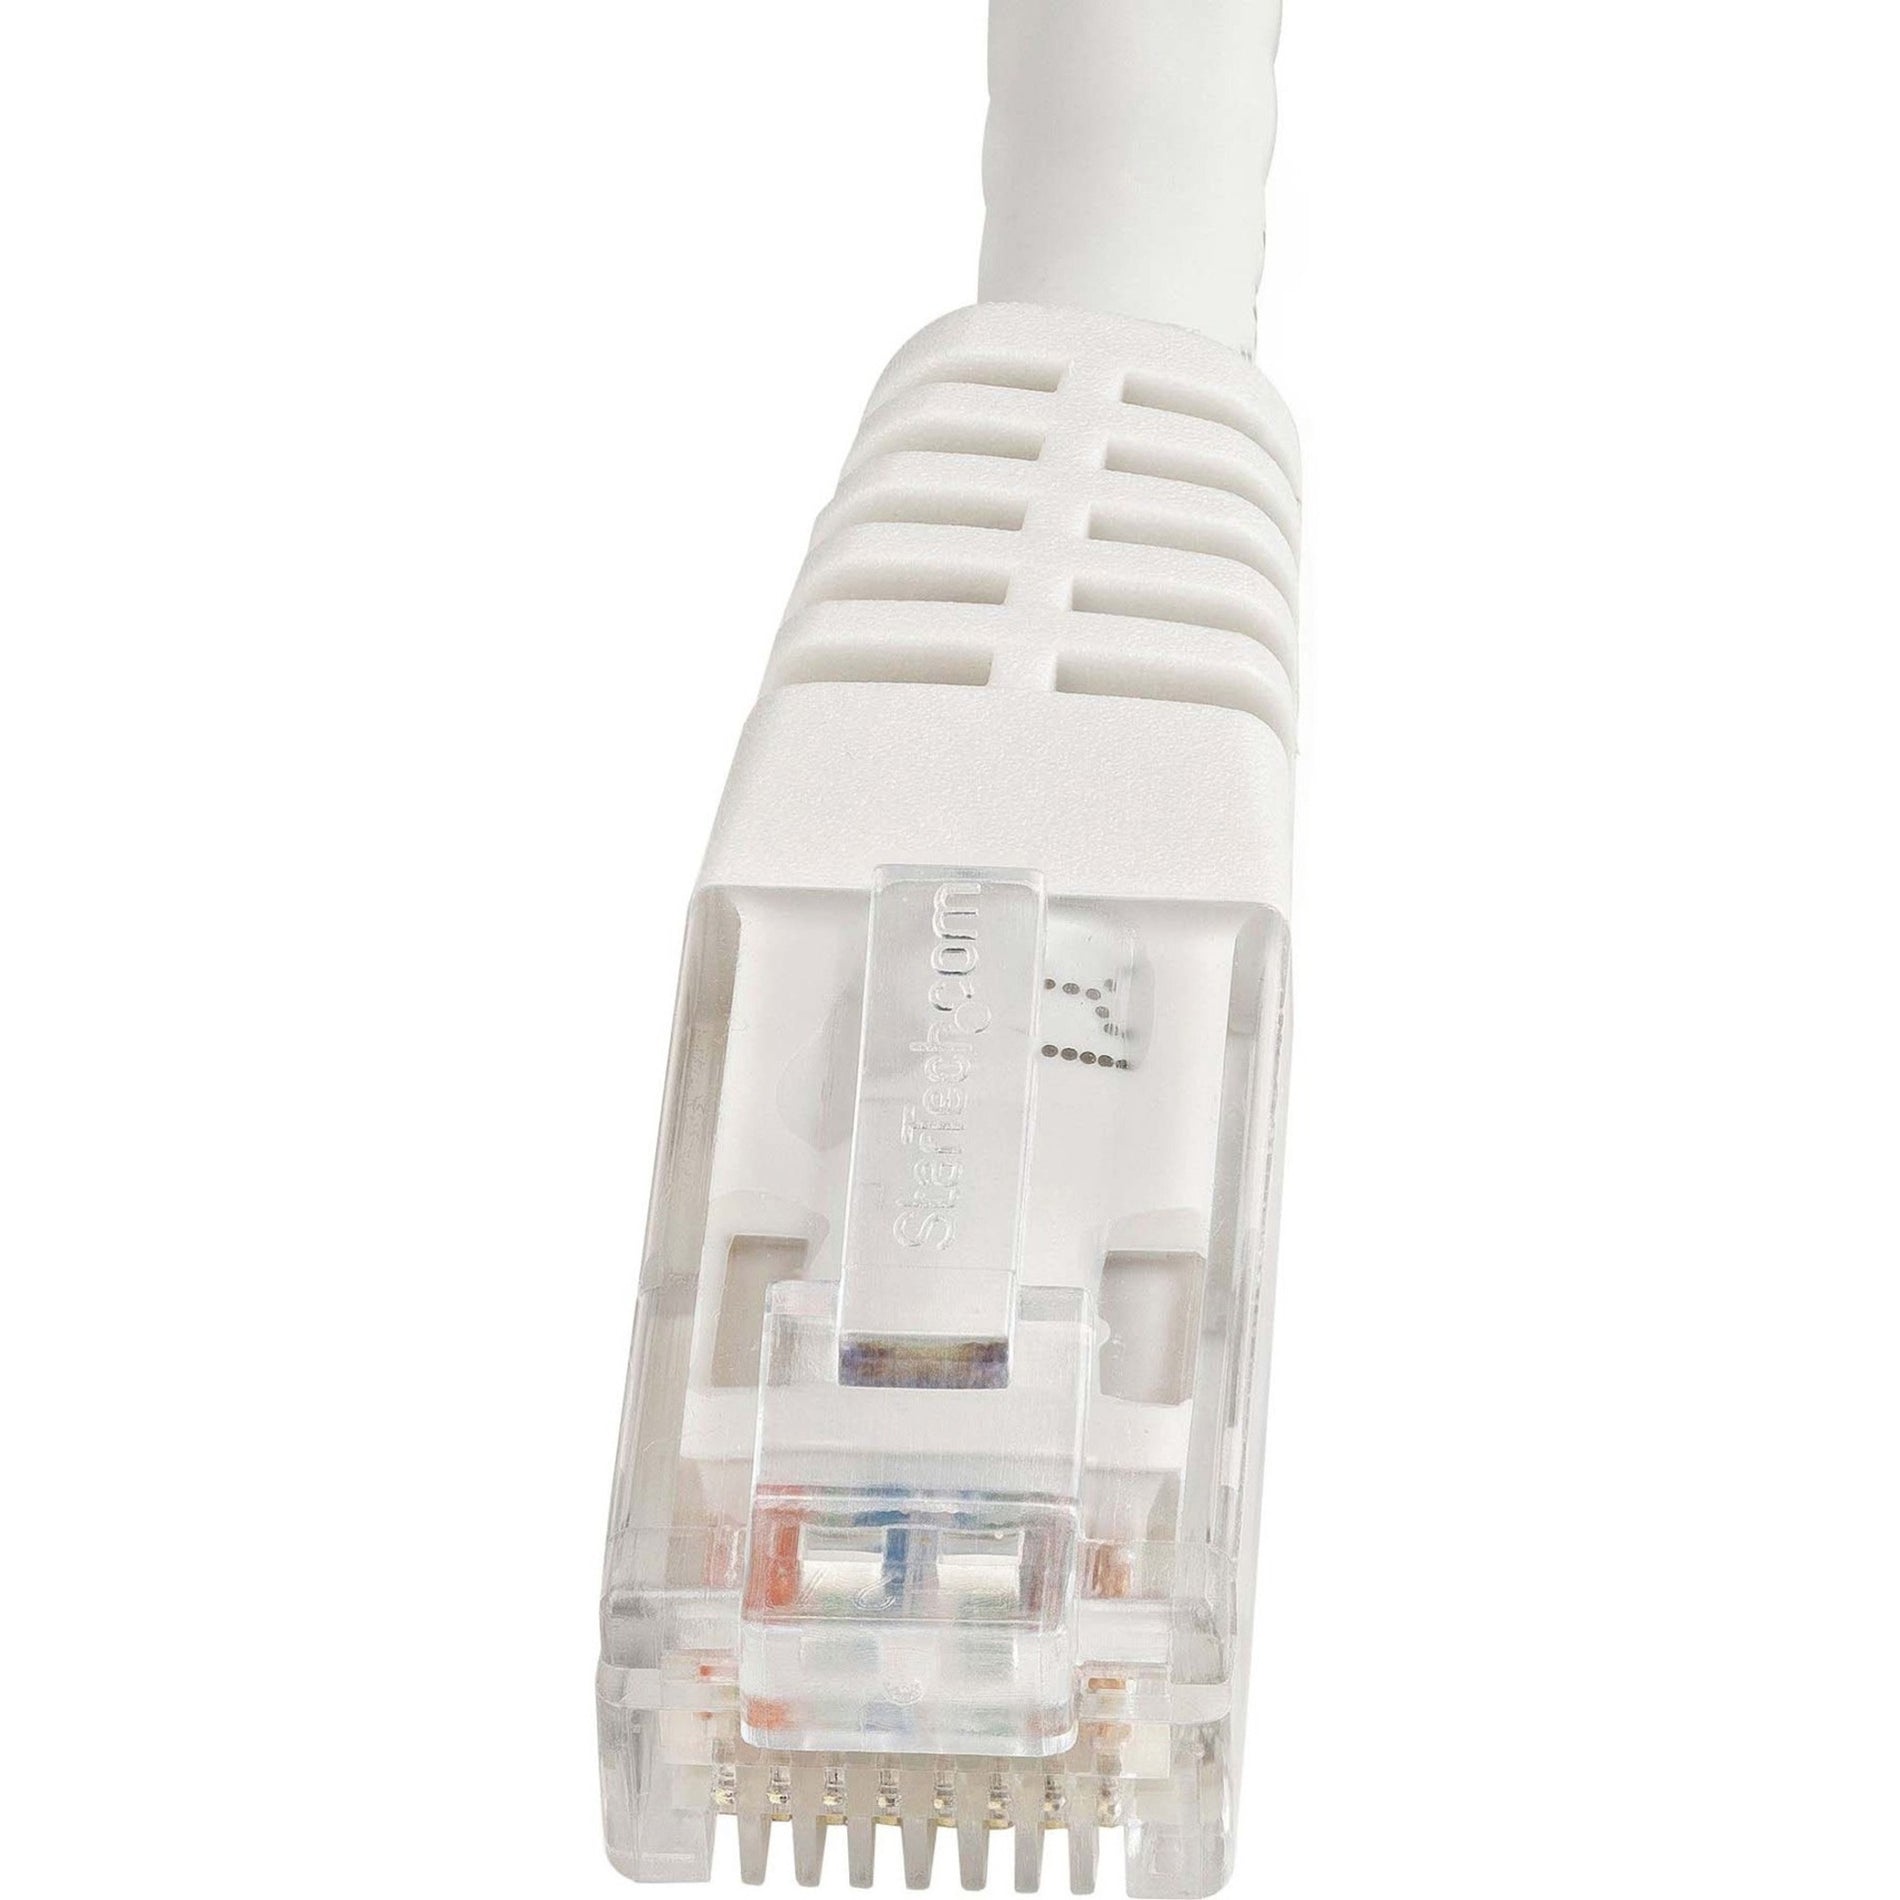 StarTech.com C6PATCH2WH 2ft White Cat6 UTP Patch Cable ETL Verified, 10 Gbit/s Data Transfer Rate, Gold Plated Connectors